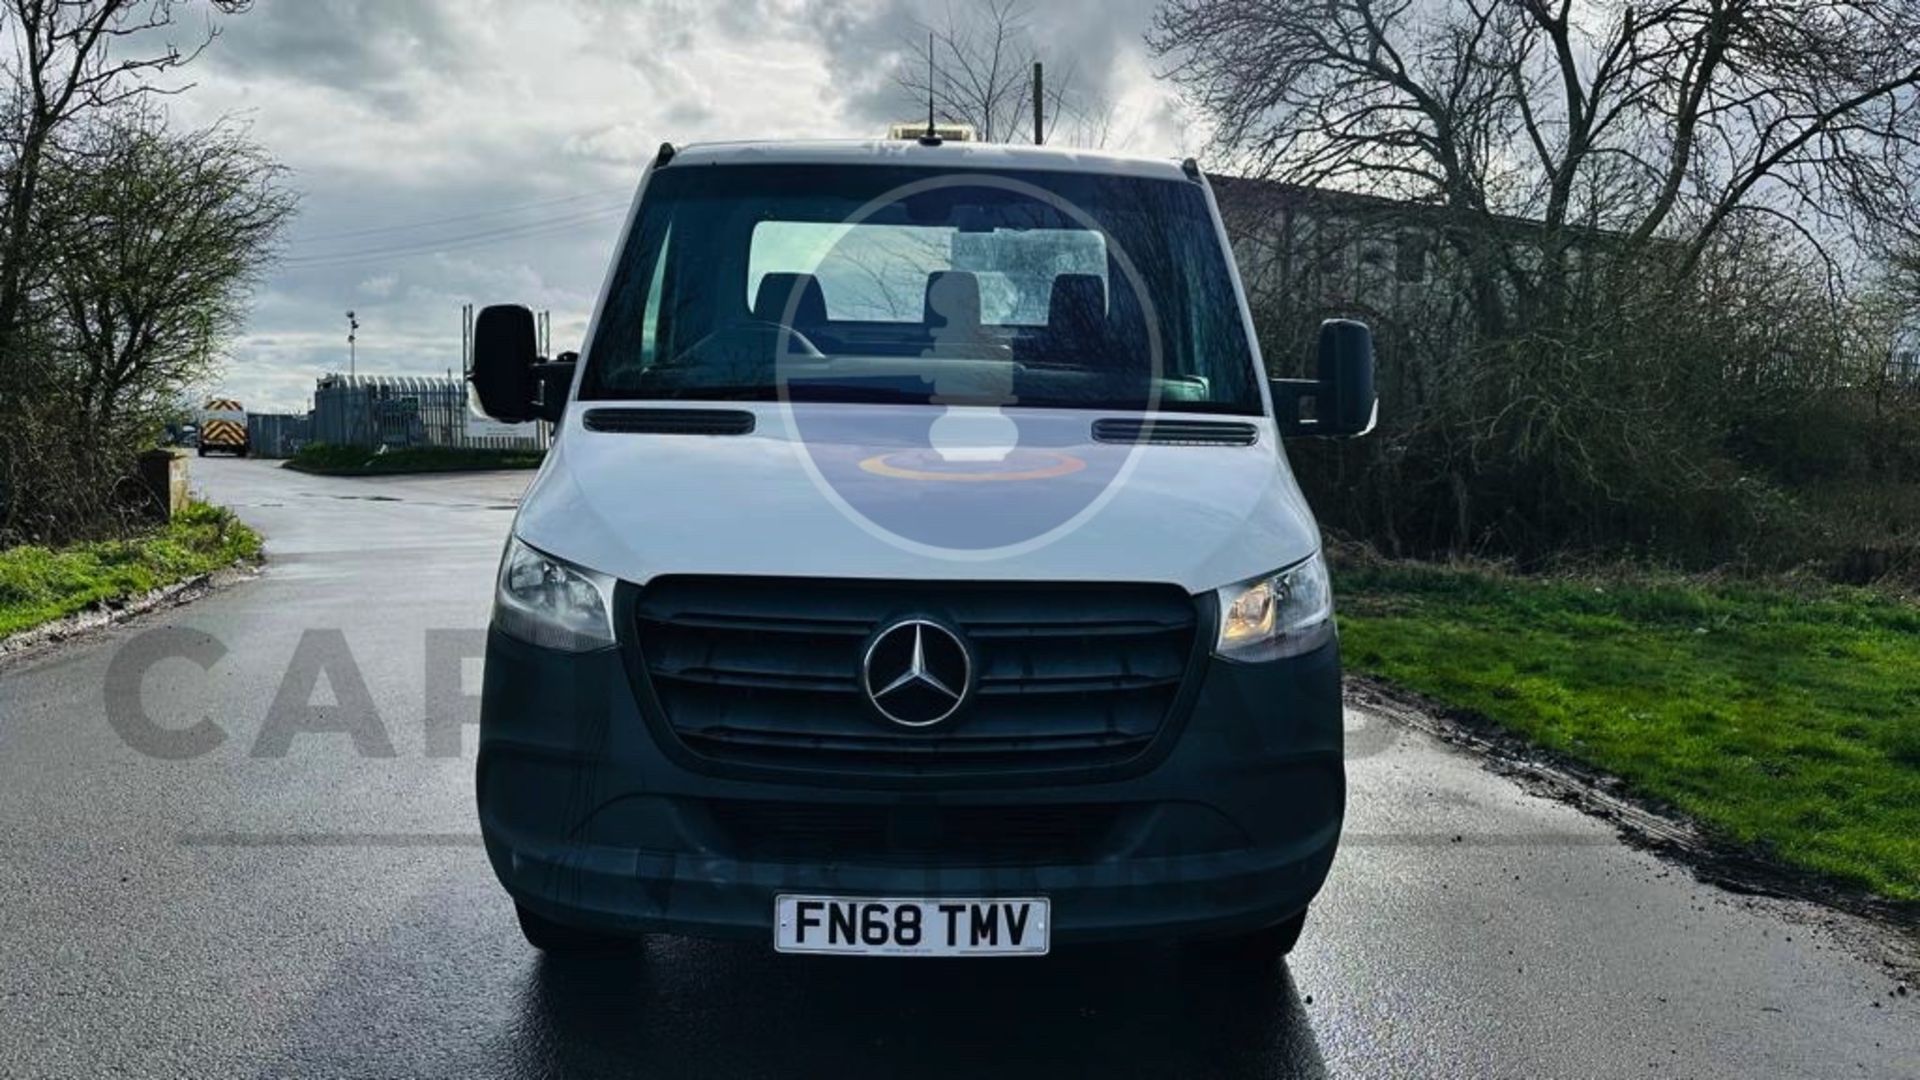 MERCEDES SPRINTER 314CDI "LWB RECOVERY TRUCK" 2019 MODEL - 1 OWNER - NEW BODY FITTED WITH ELEC WINCH - Image 5 of 37